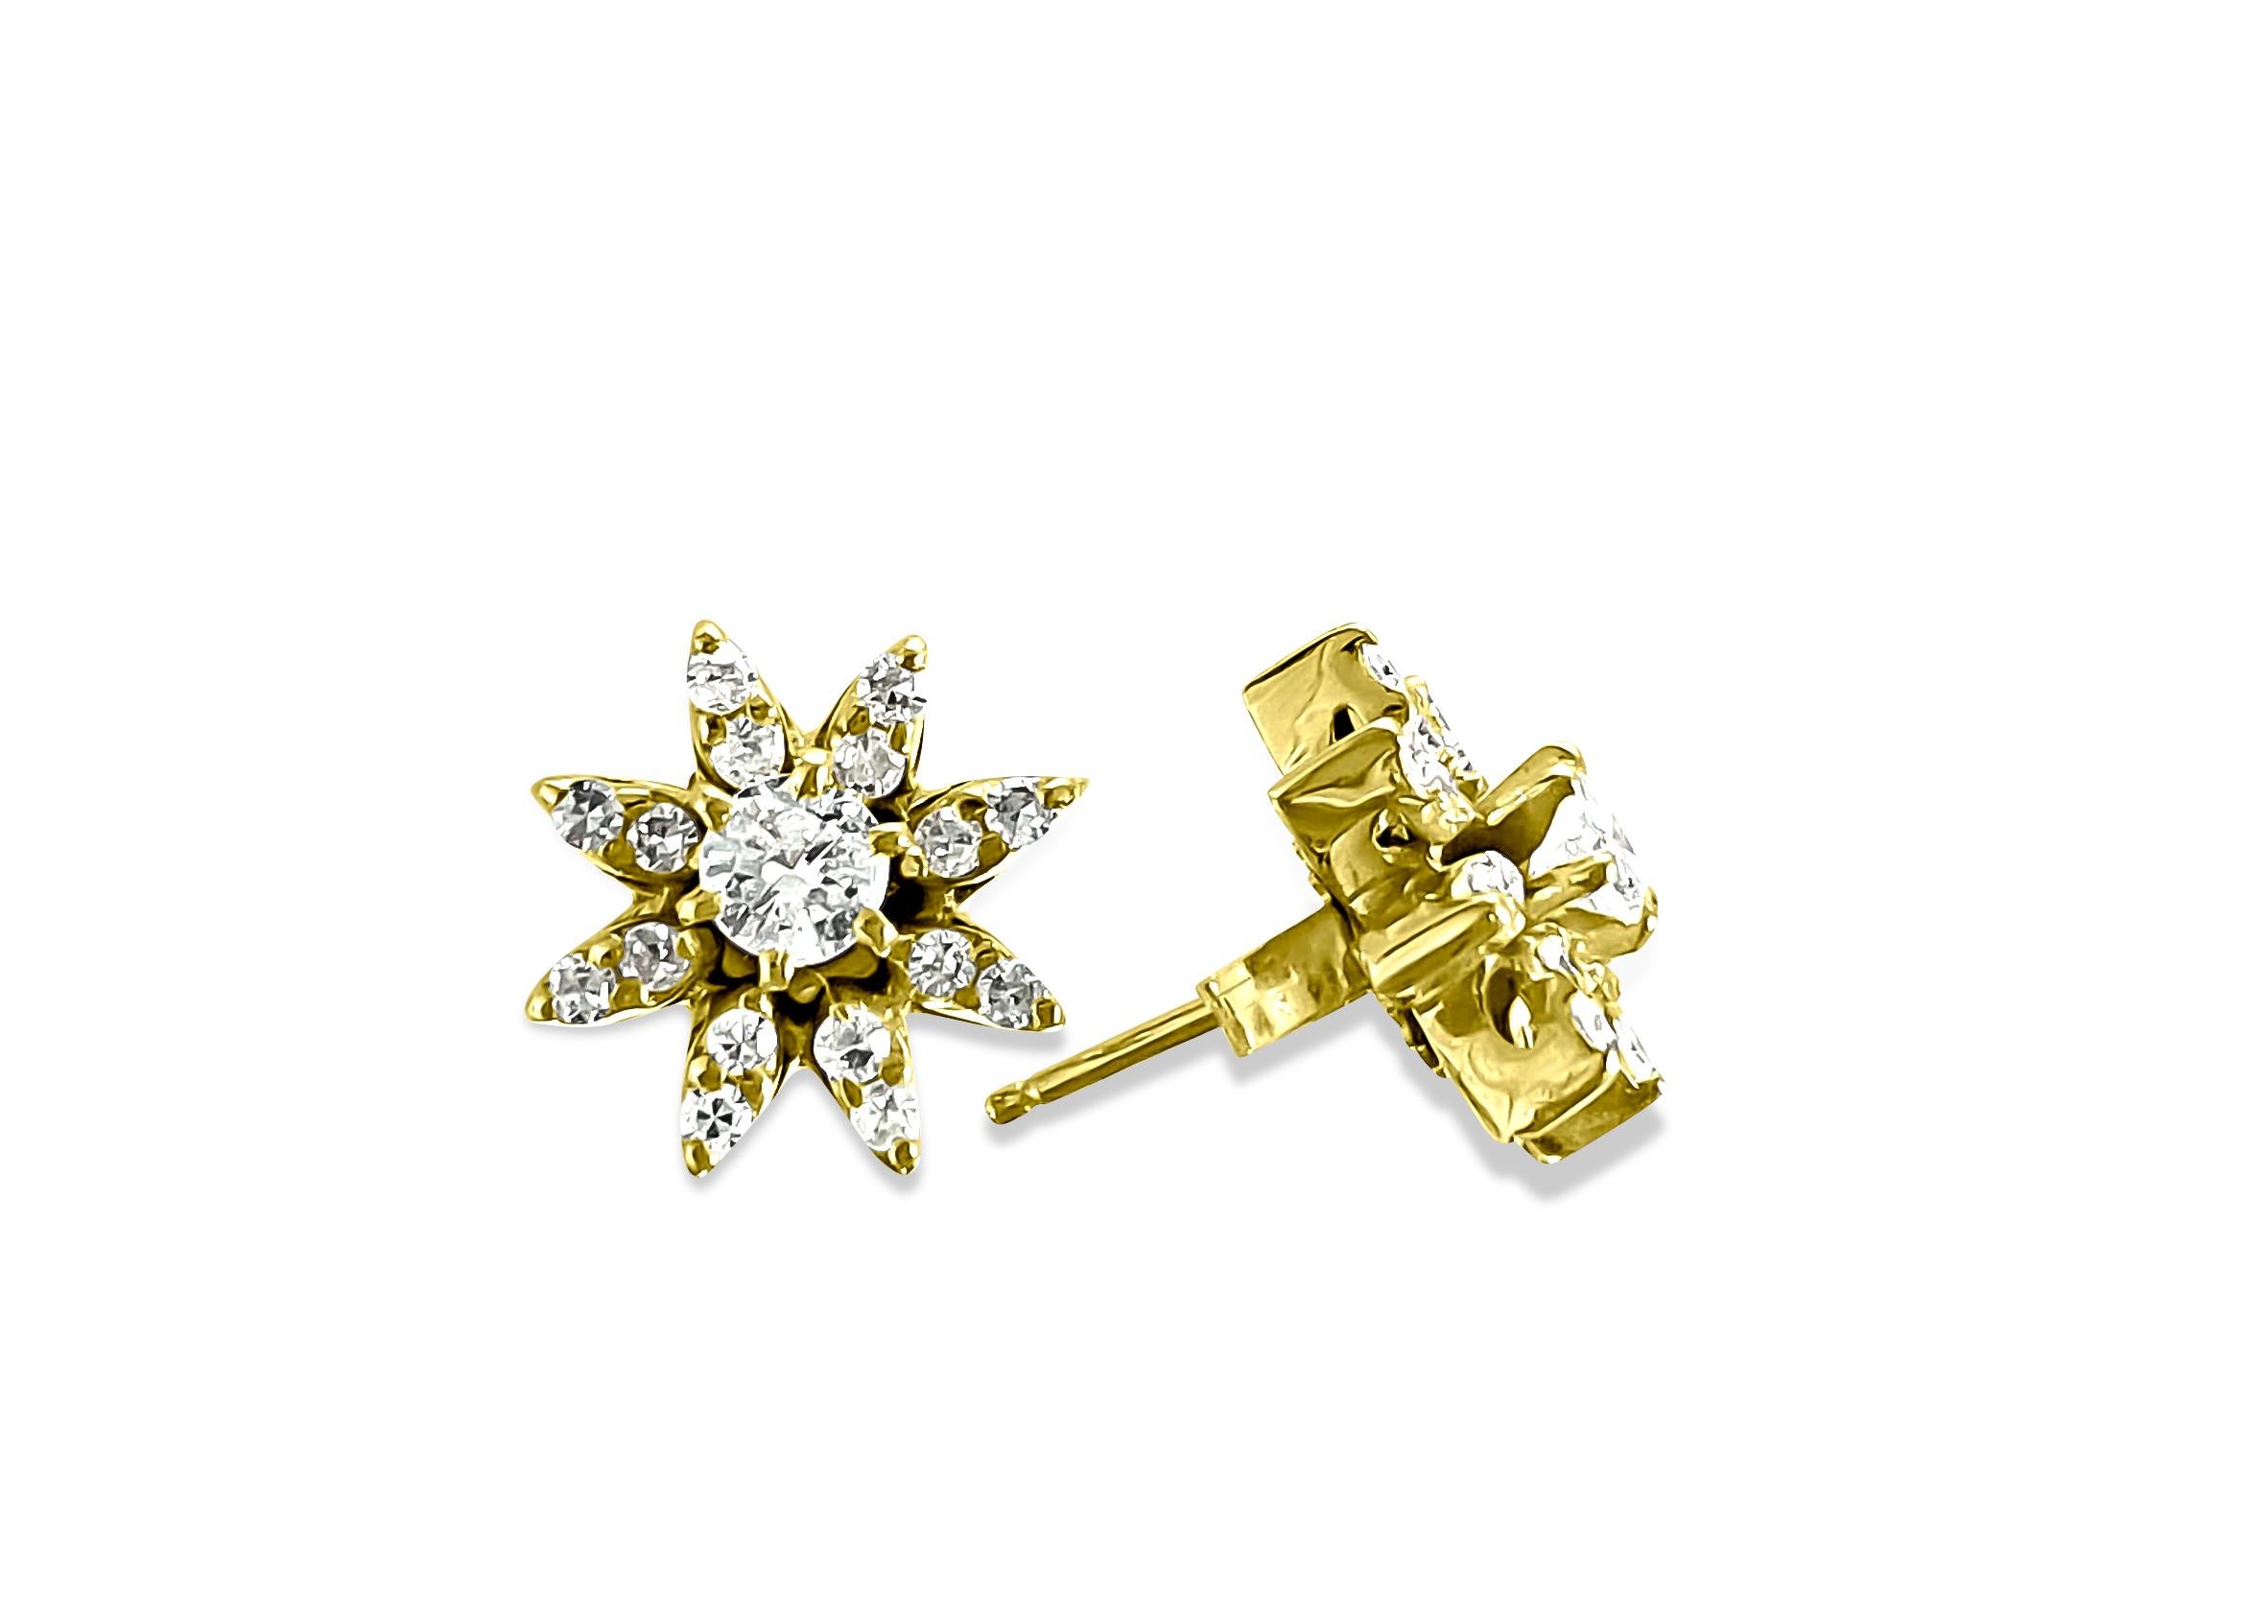 Embrace timeless elegance with these exquisite 14K yellow gold earrings adorned with a total of 1.00 carat dazzling diamonds. Each diamond boasts VS clarity and G color, ensuring brilliance. Mined from the earth, these round brilliant cut diamonds